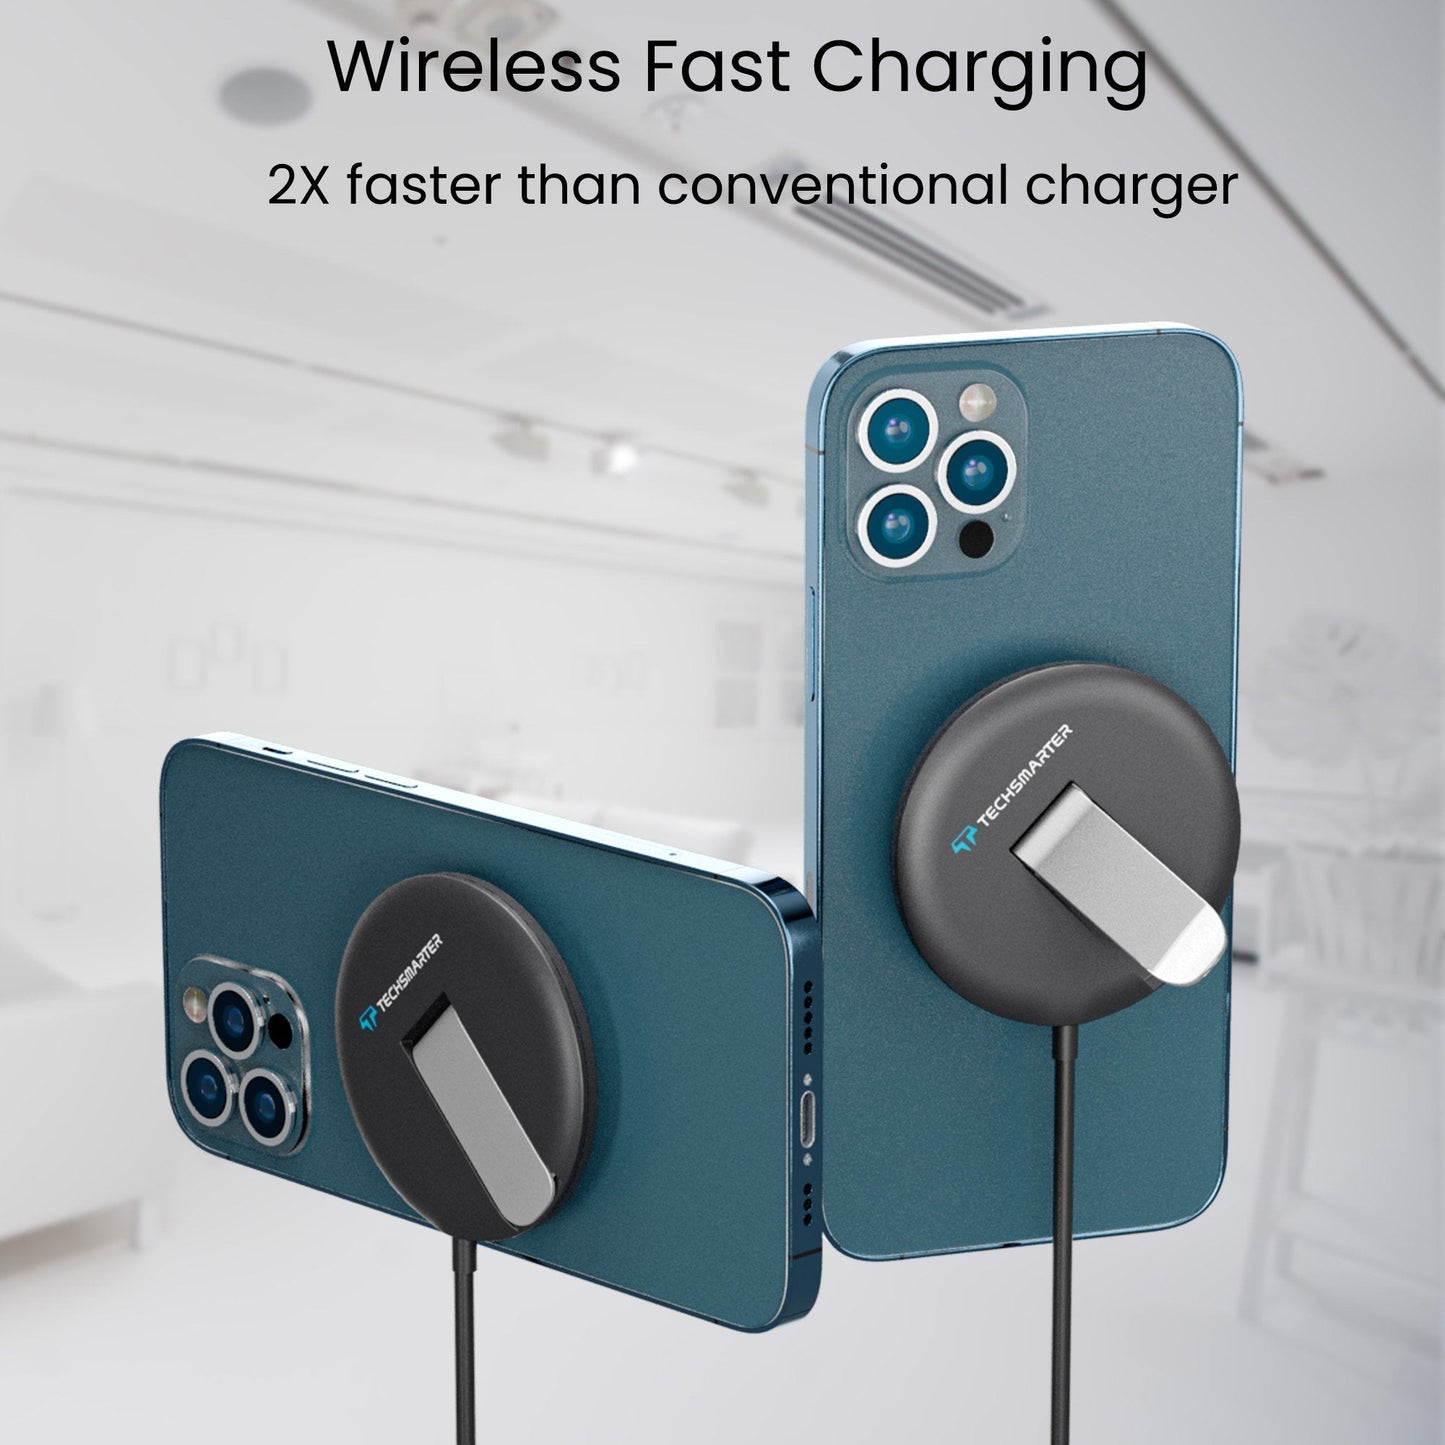 MagBoost Wireless Charger Pad Kickstand with Wall Charger - TechsmarterTechsmarter